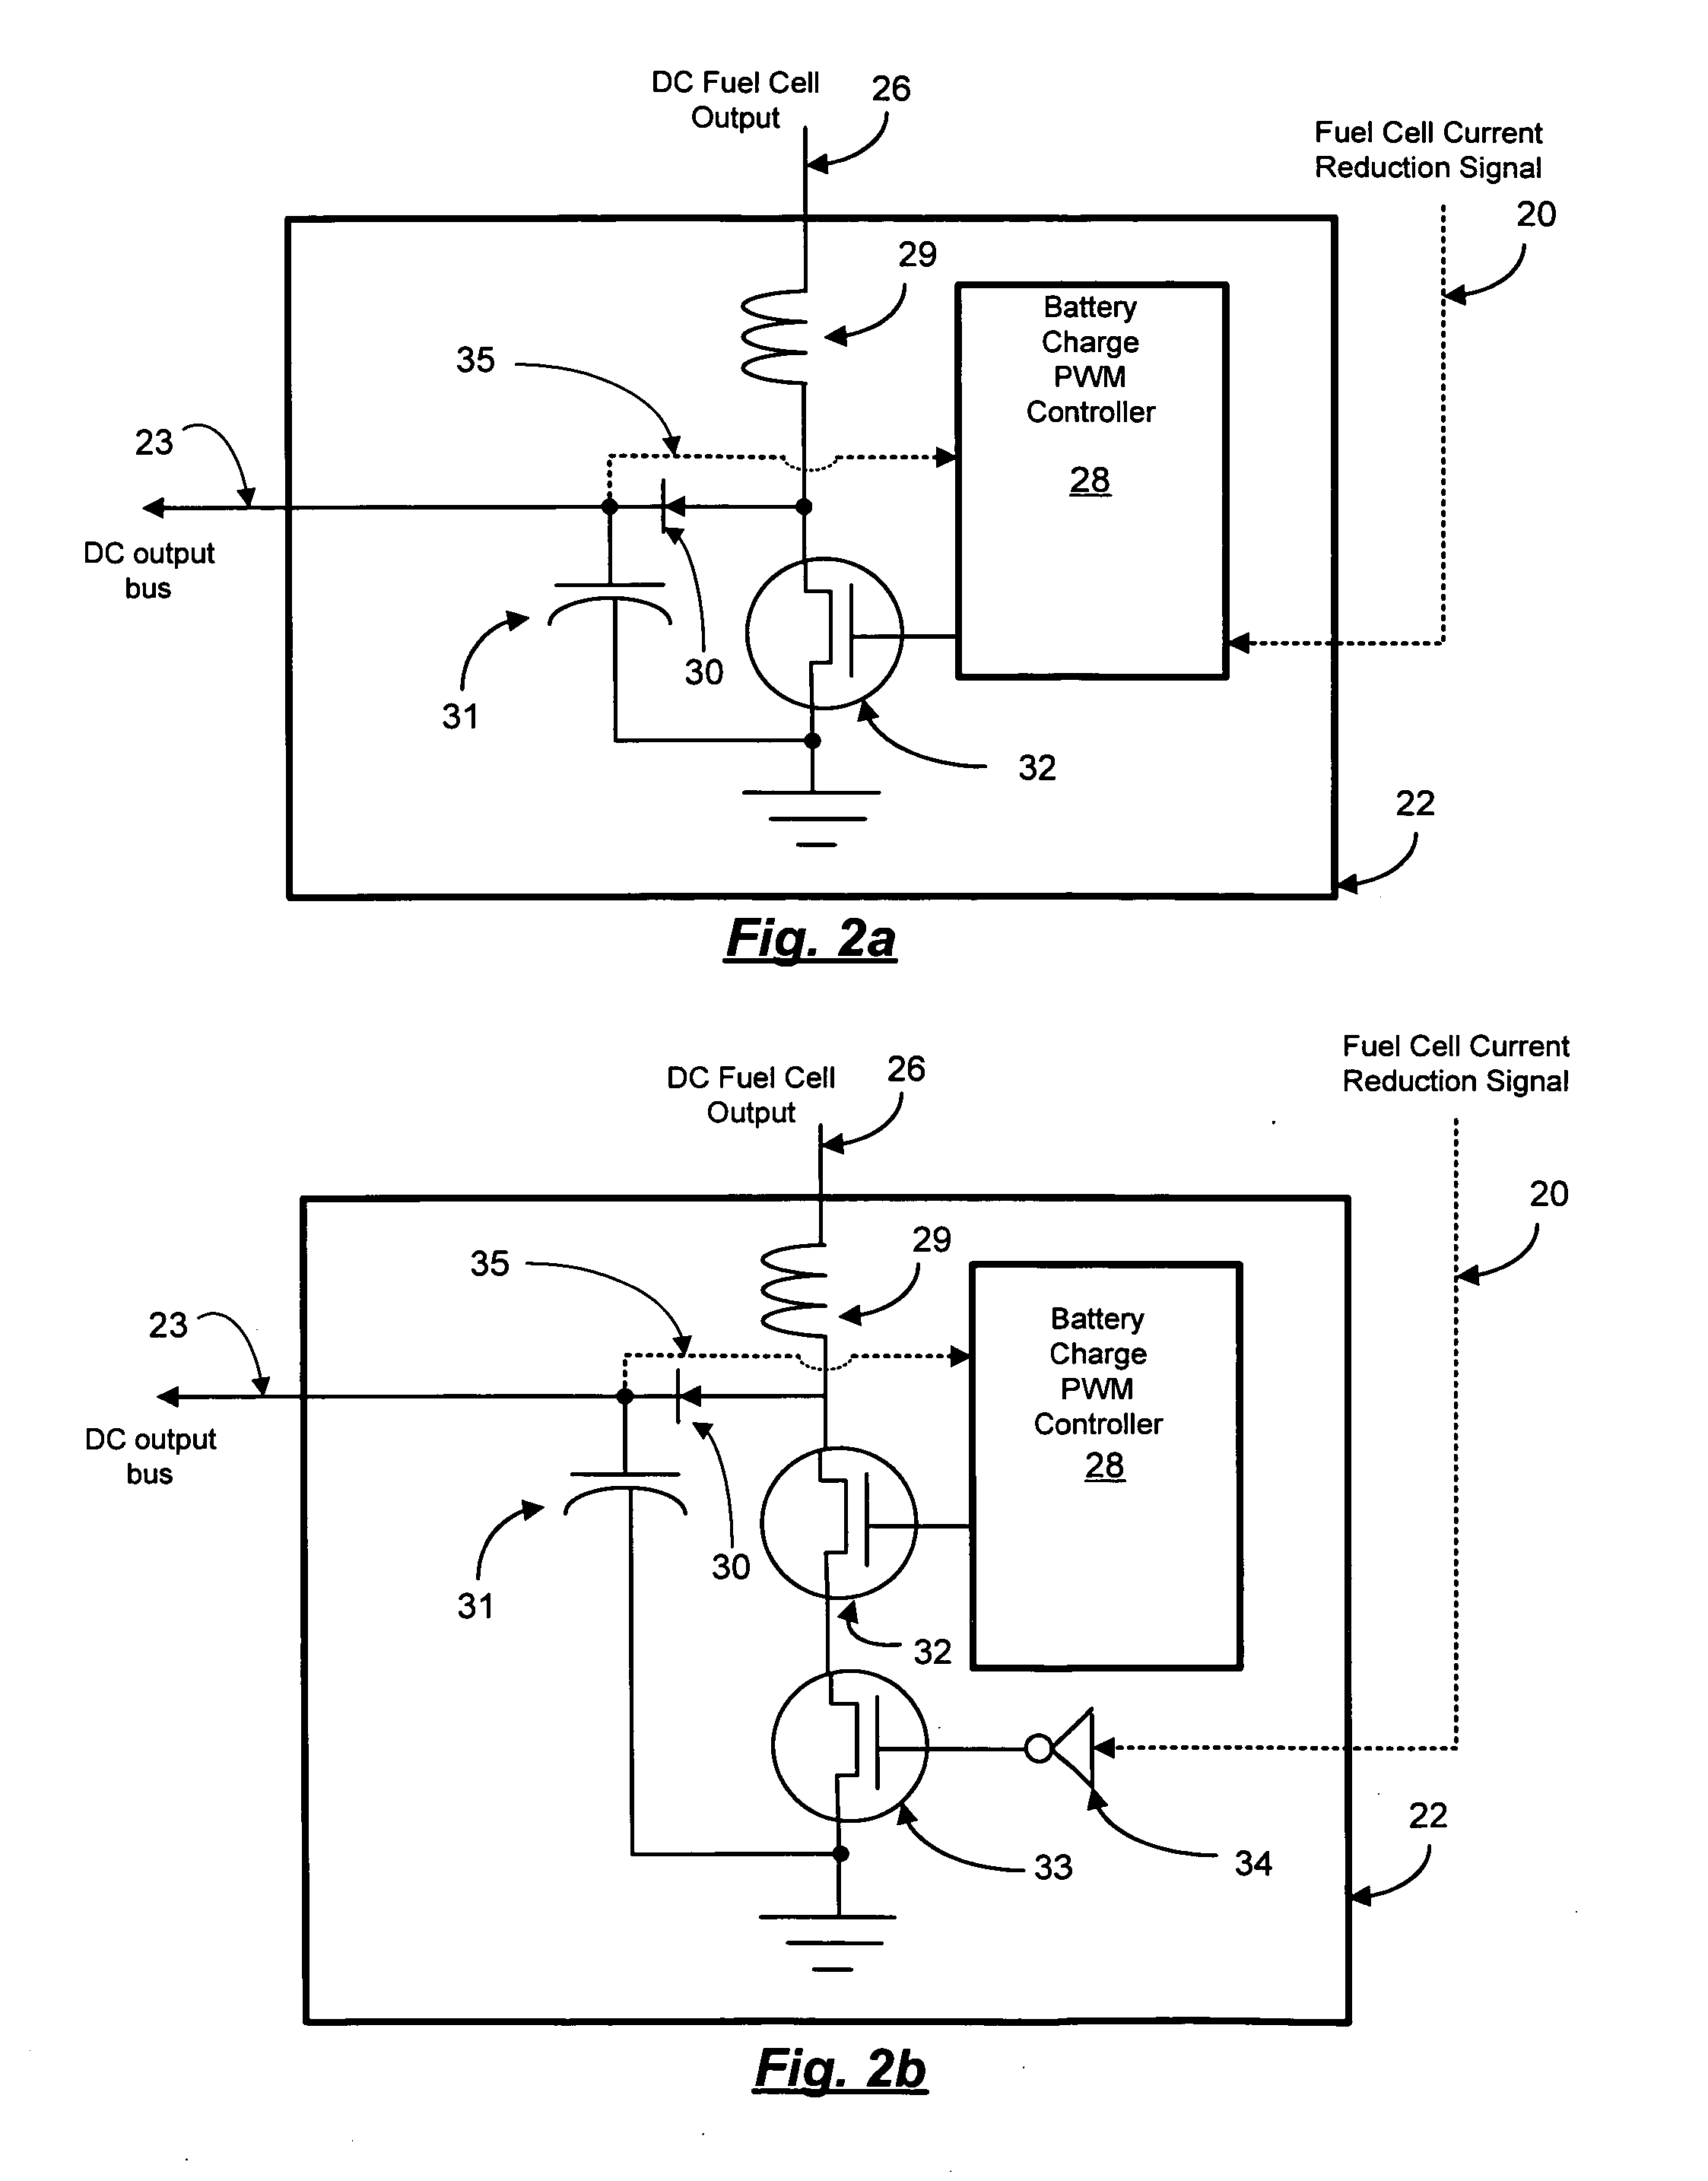 Reformer and fuel cell system control and method of operation